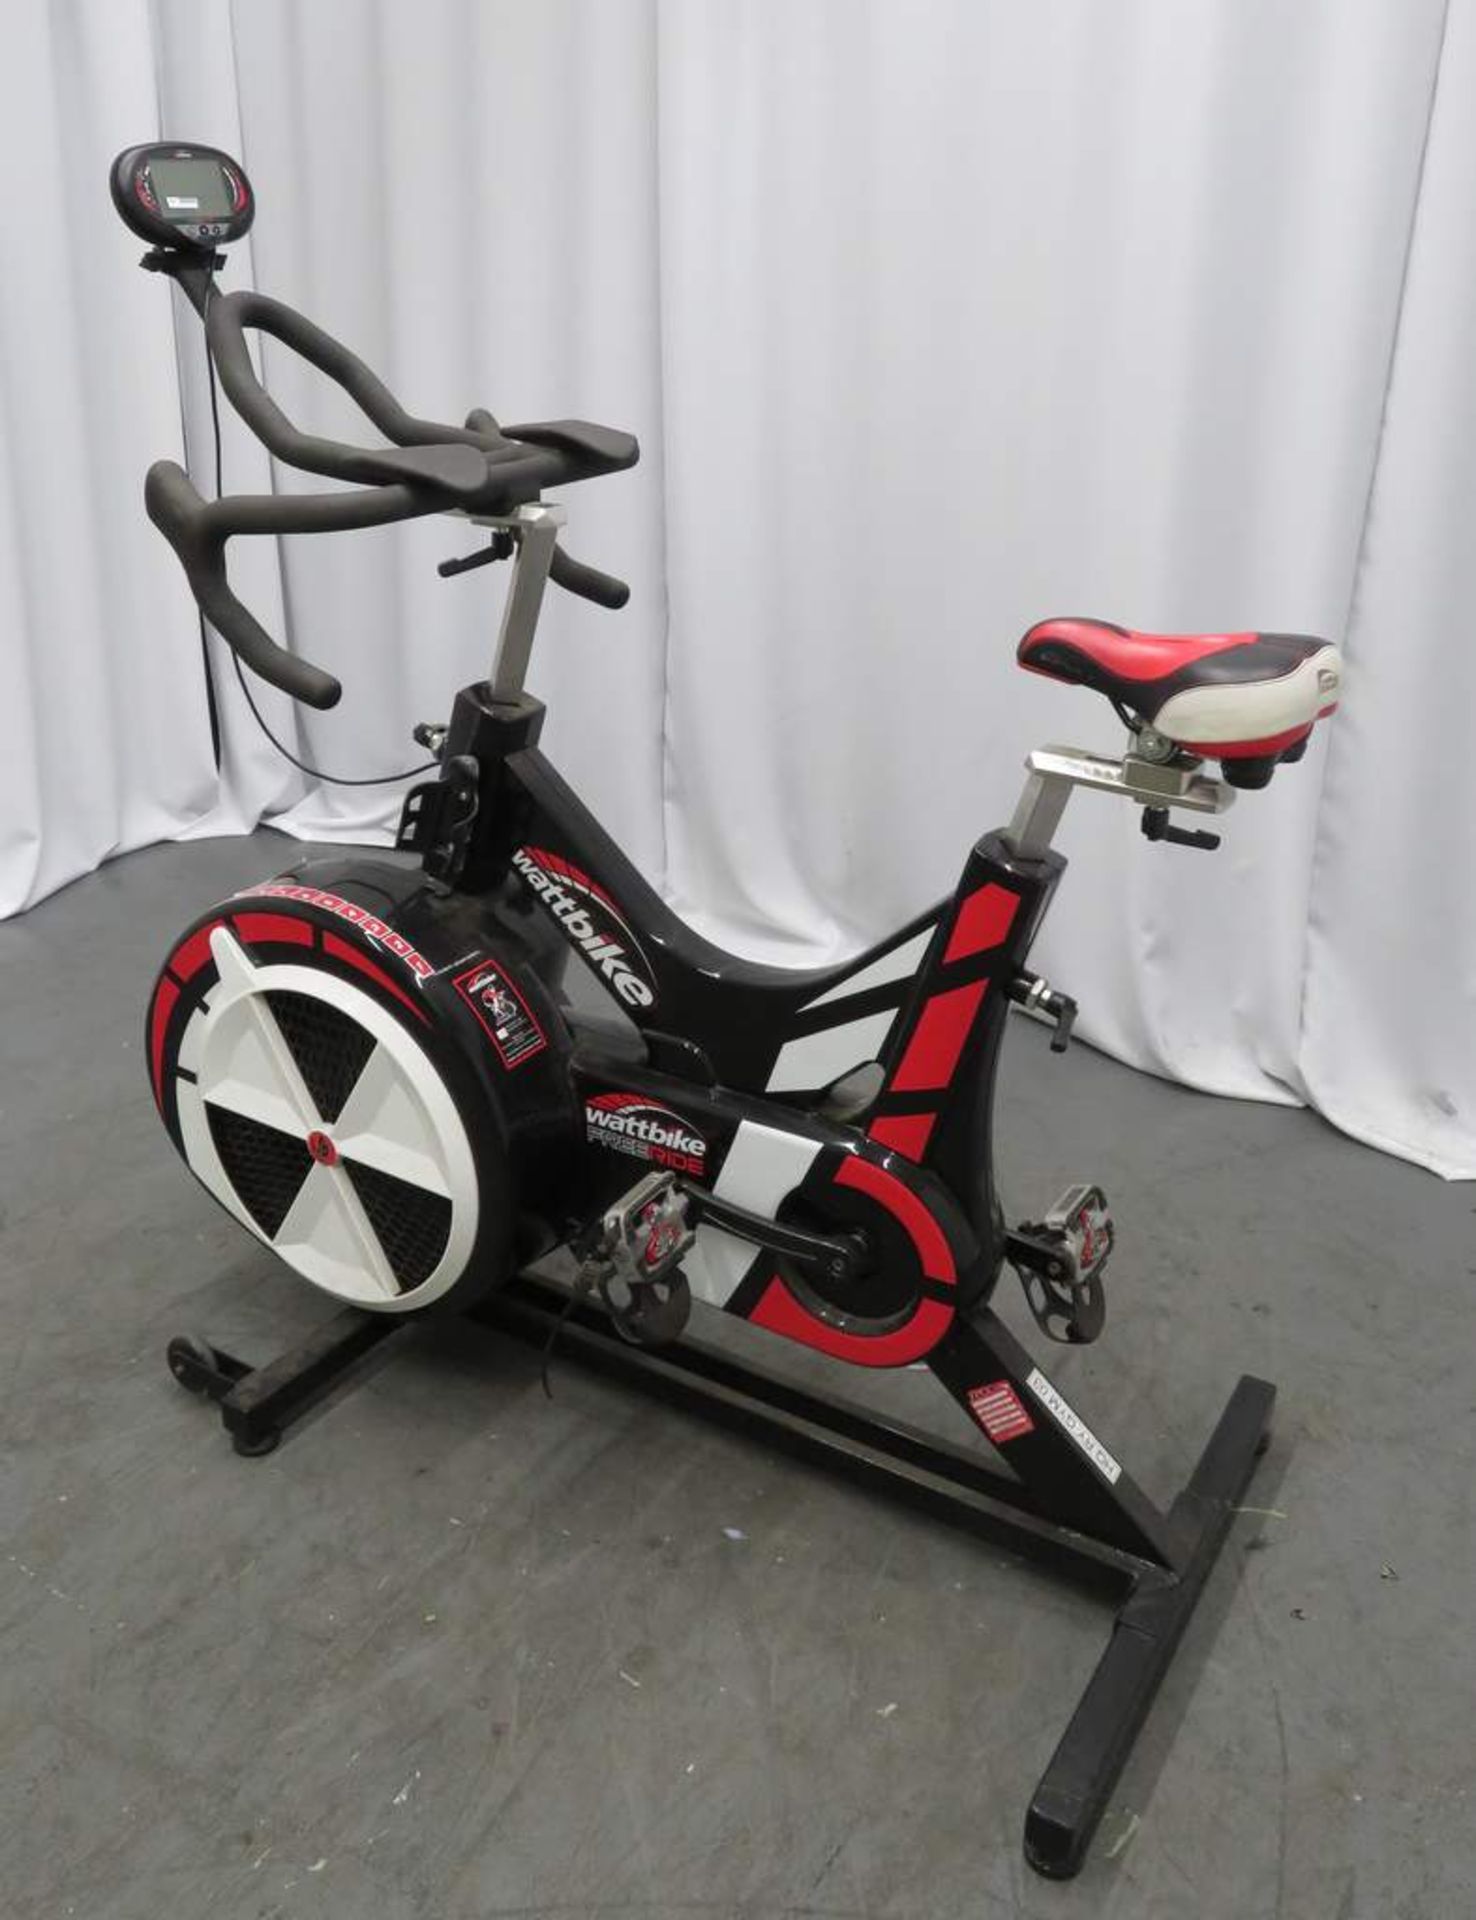 Watt Bike Free Ride Exercise Bike, Complete With Console.